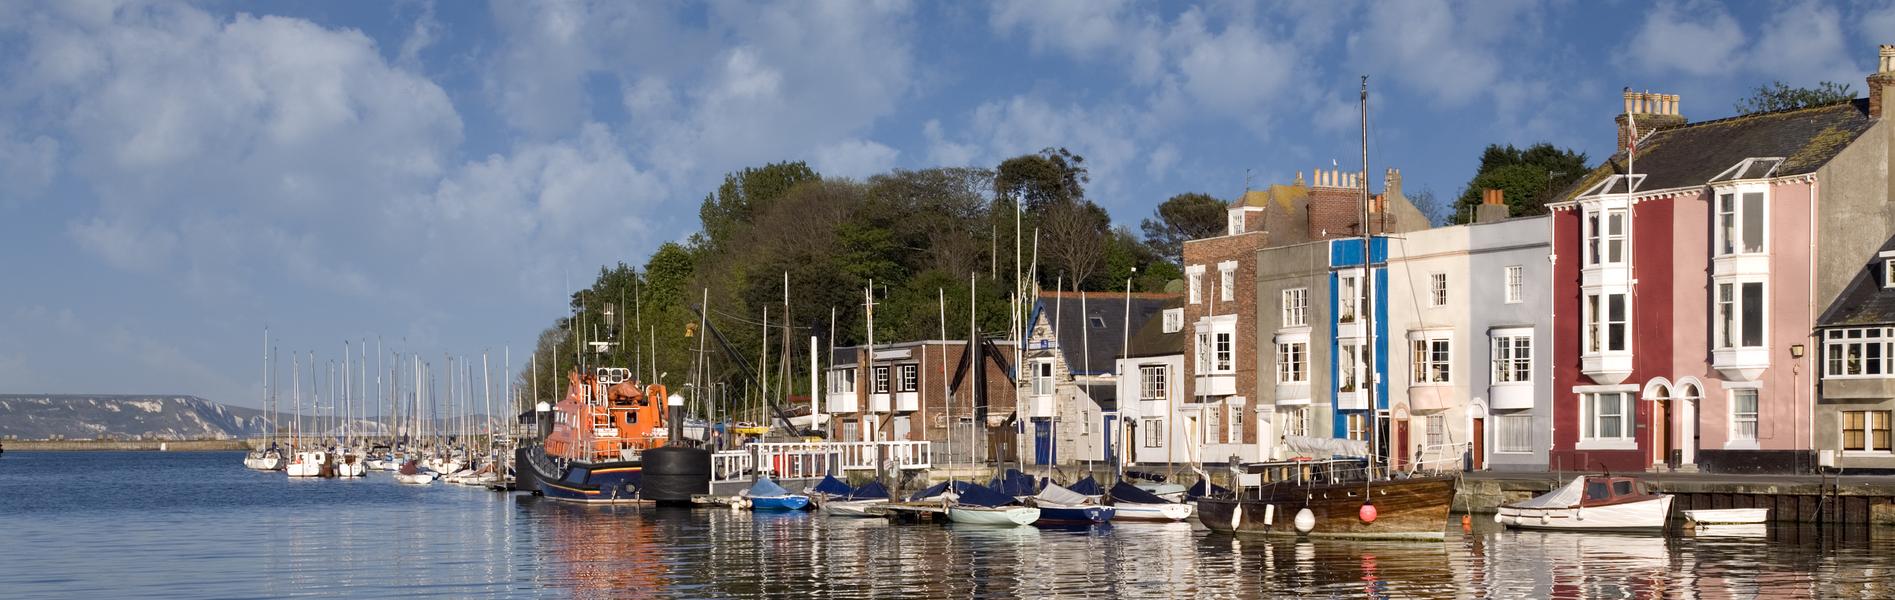 Accommodation & Holiday Cottages in Weymouth - HomeToGo